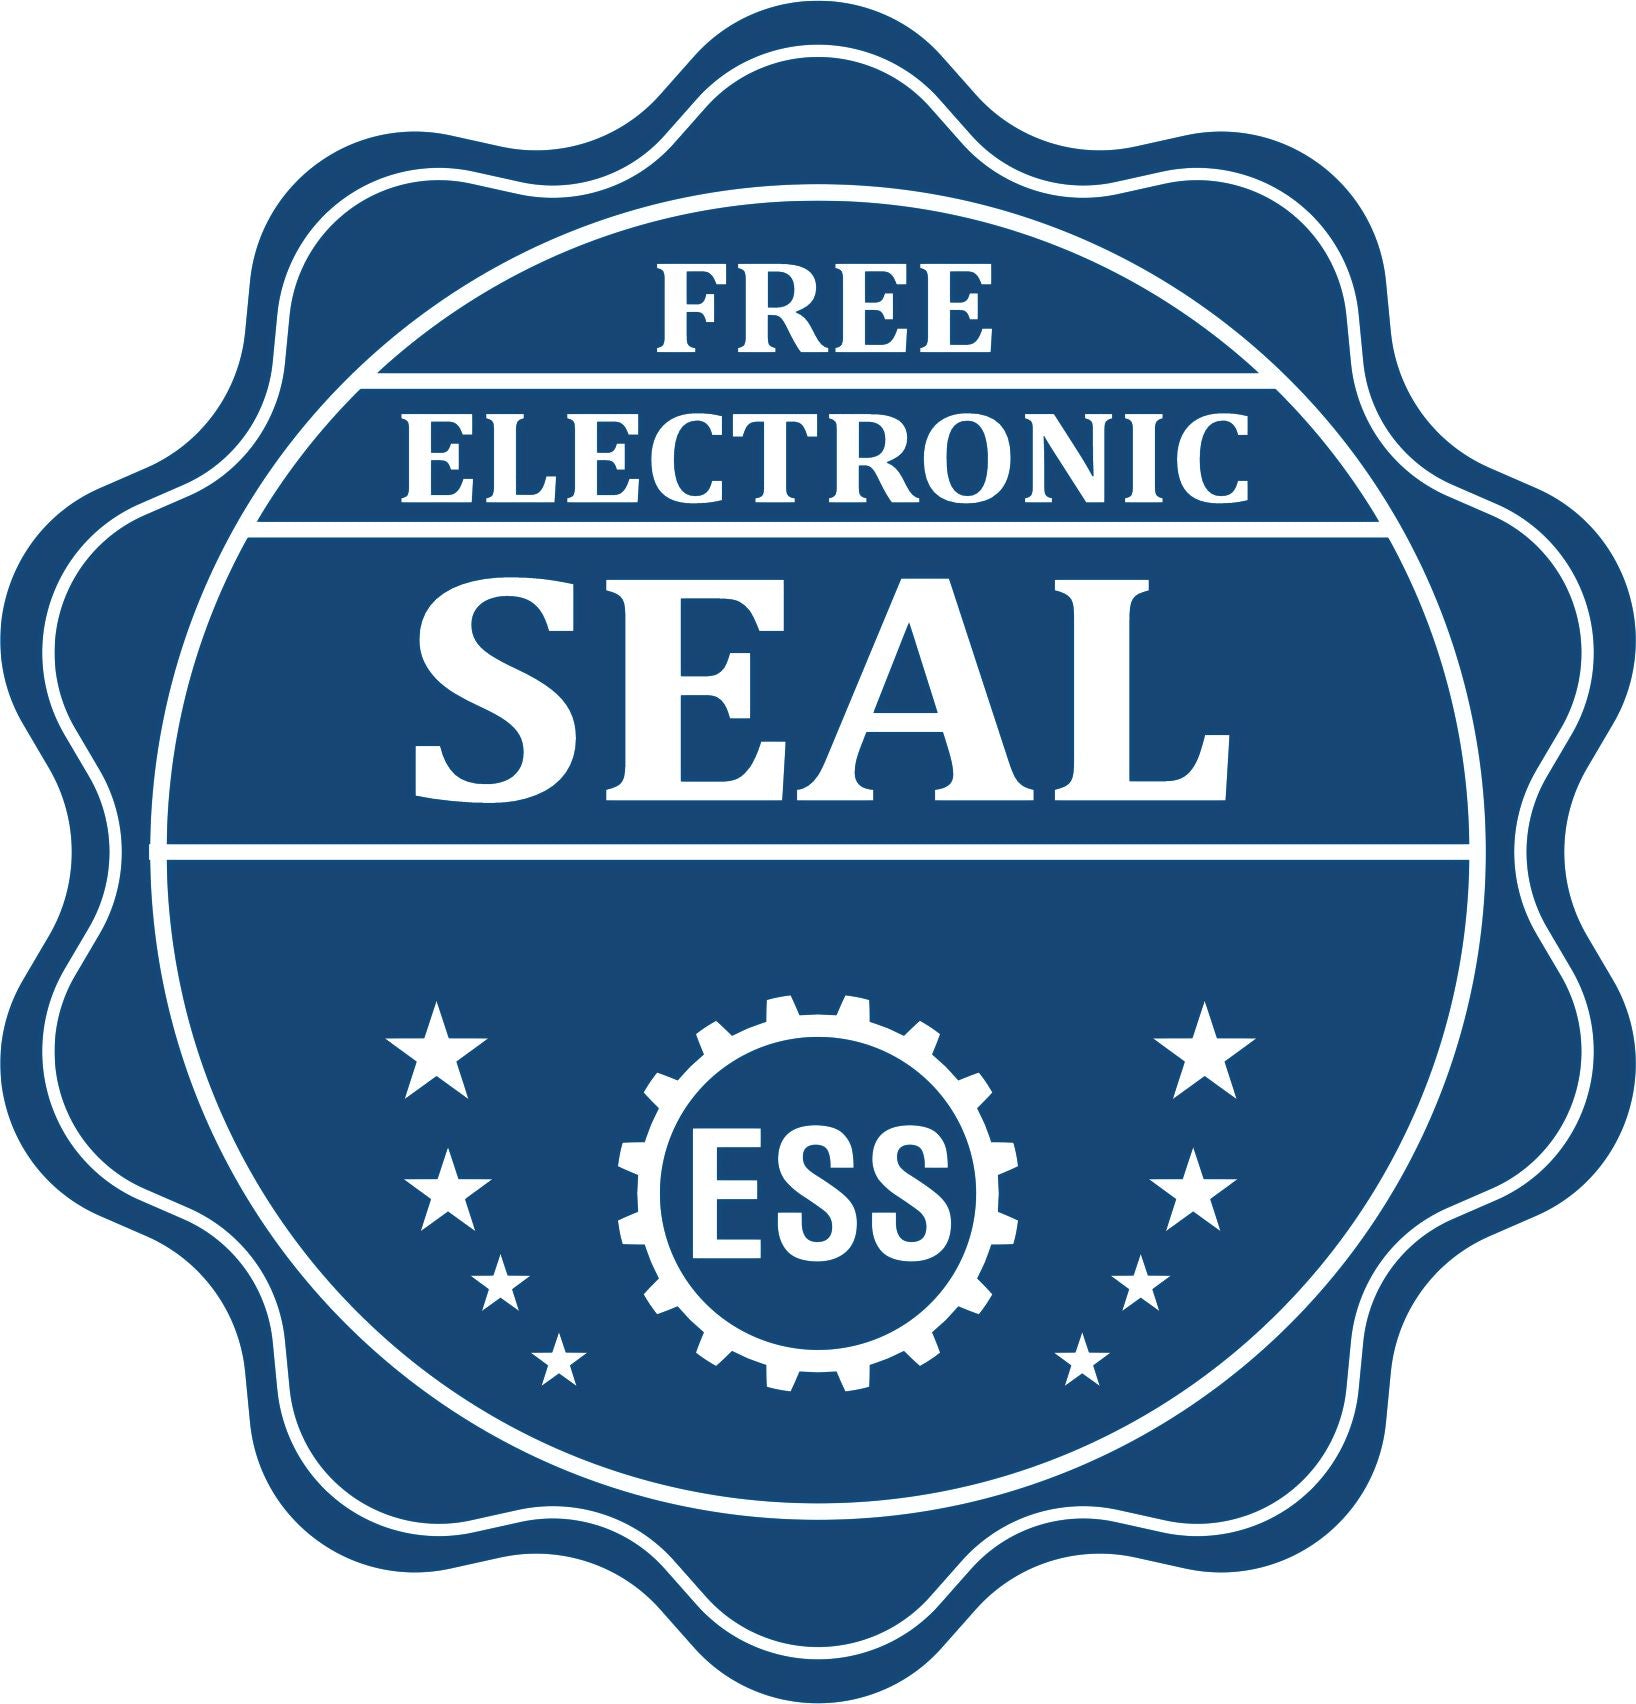 A badge showing a free electronic seal for the Slim Pre-Inked Utah Landscape Architect Seal Stamp with stars and the ESS gear on the emblem.